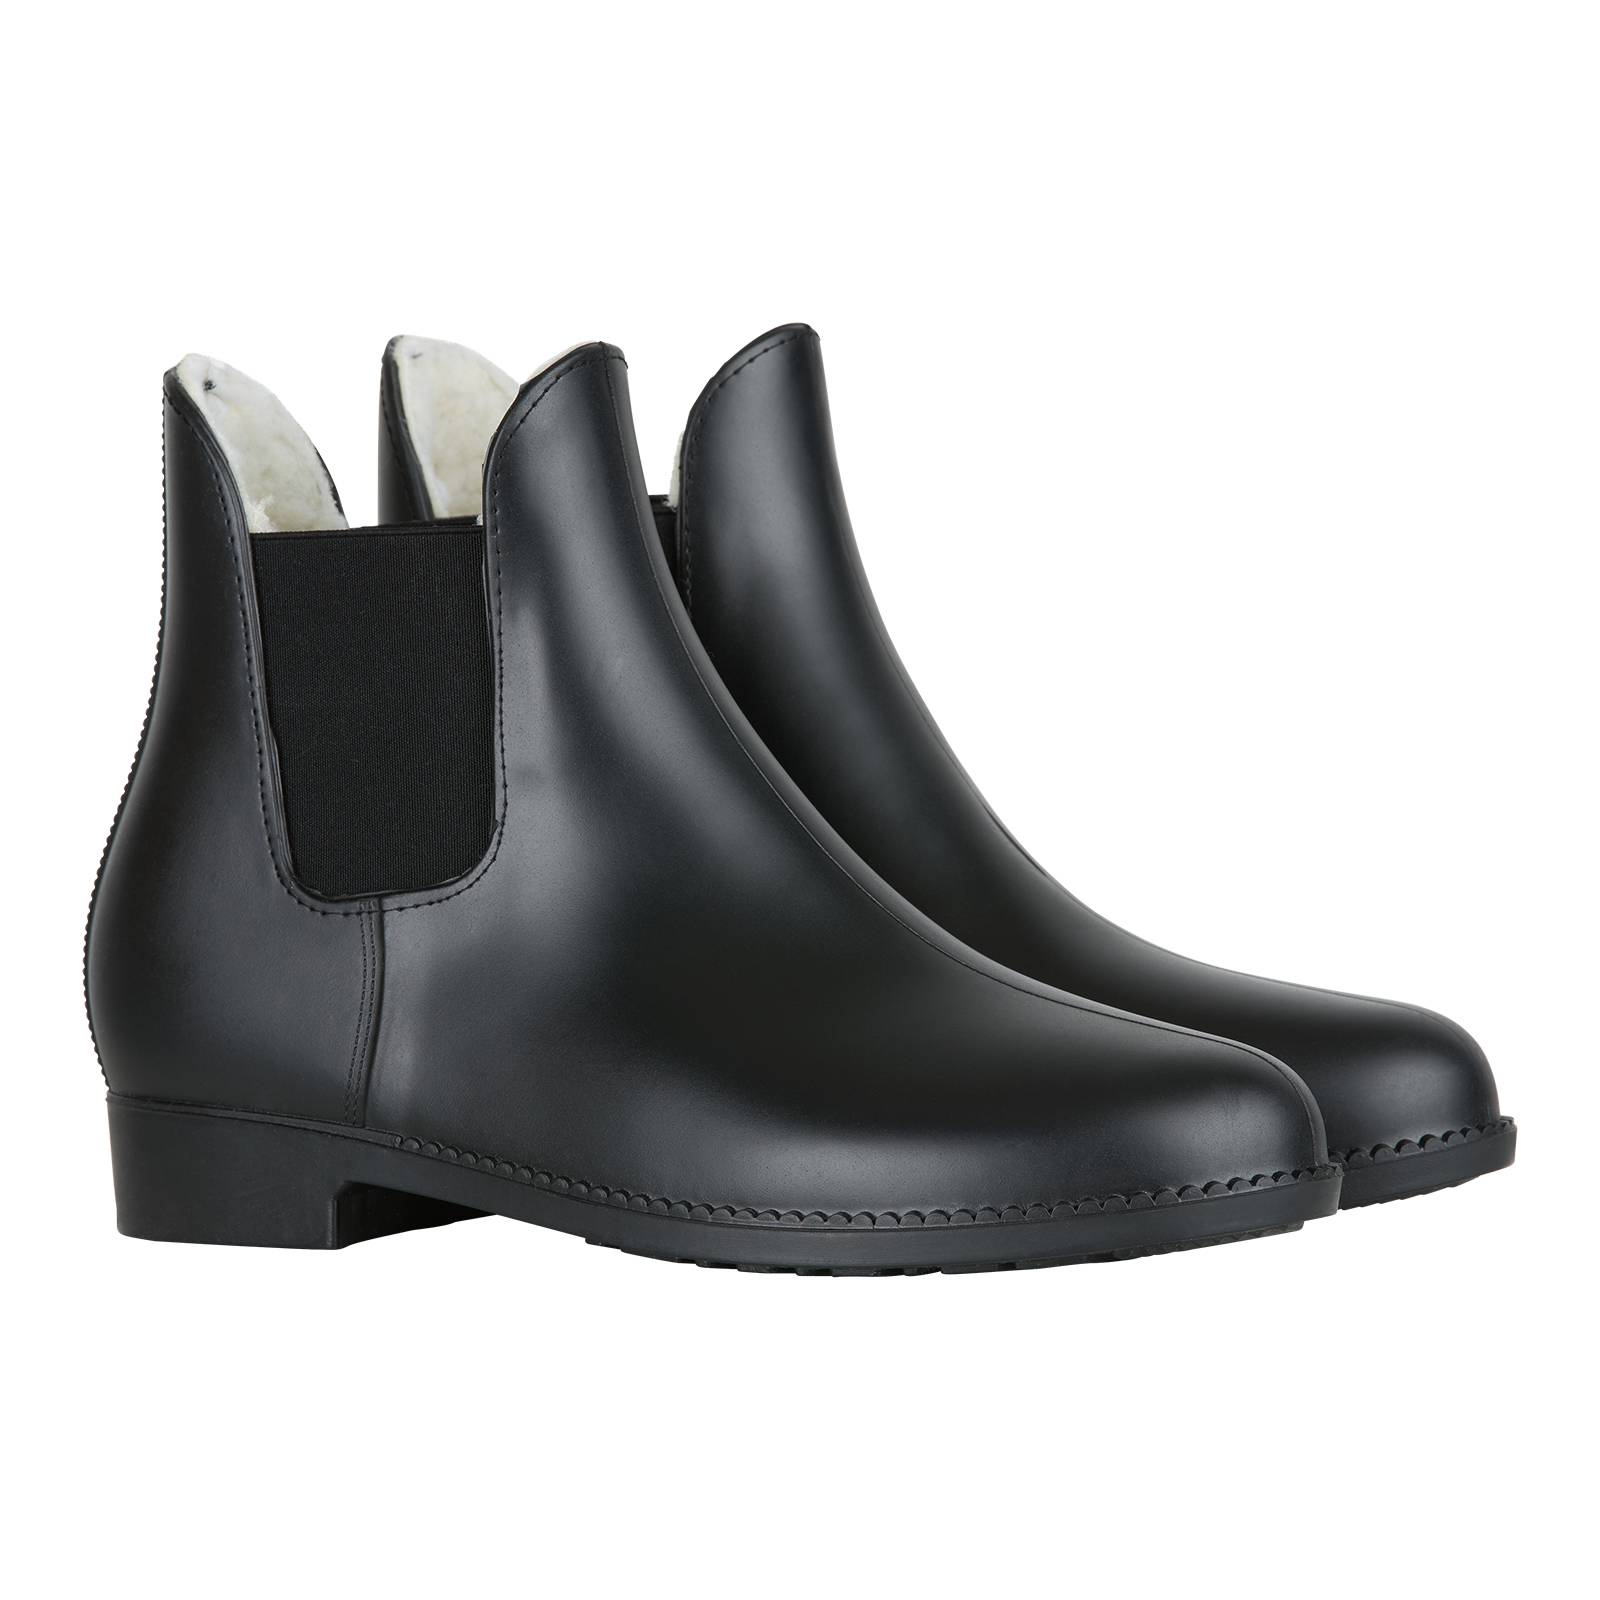 Elico Bardsey Synthetic Easy Care Adult Jodhpur Boots Black Sizes 4-9 FREE P&P 